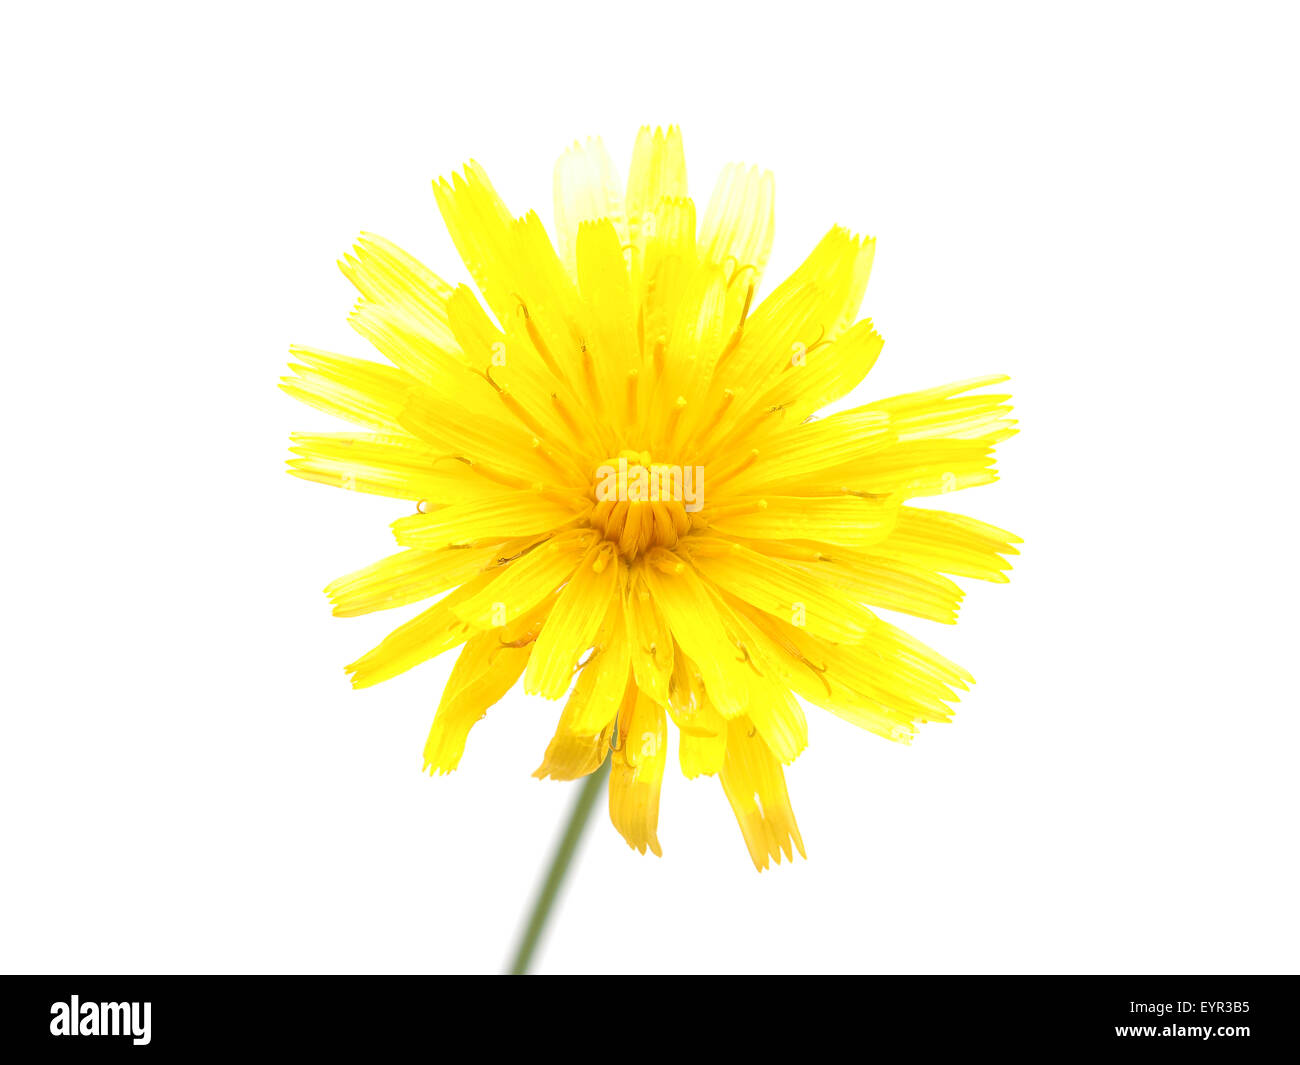 crepis flower on a white background Stock Photo